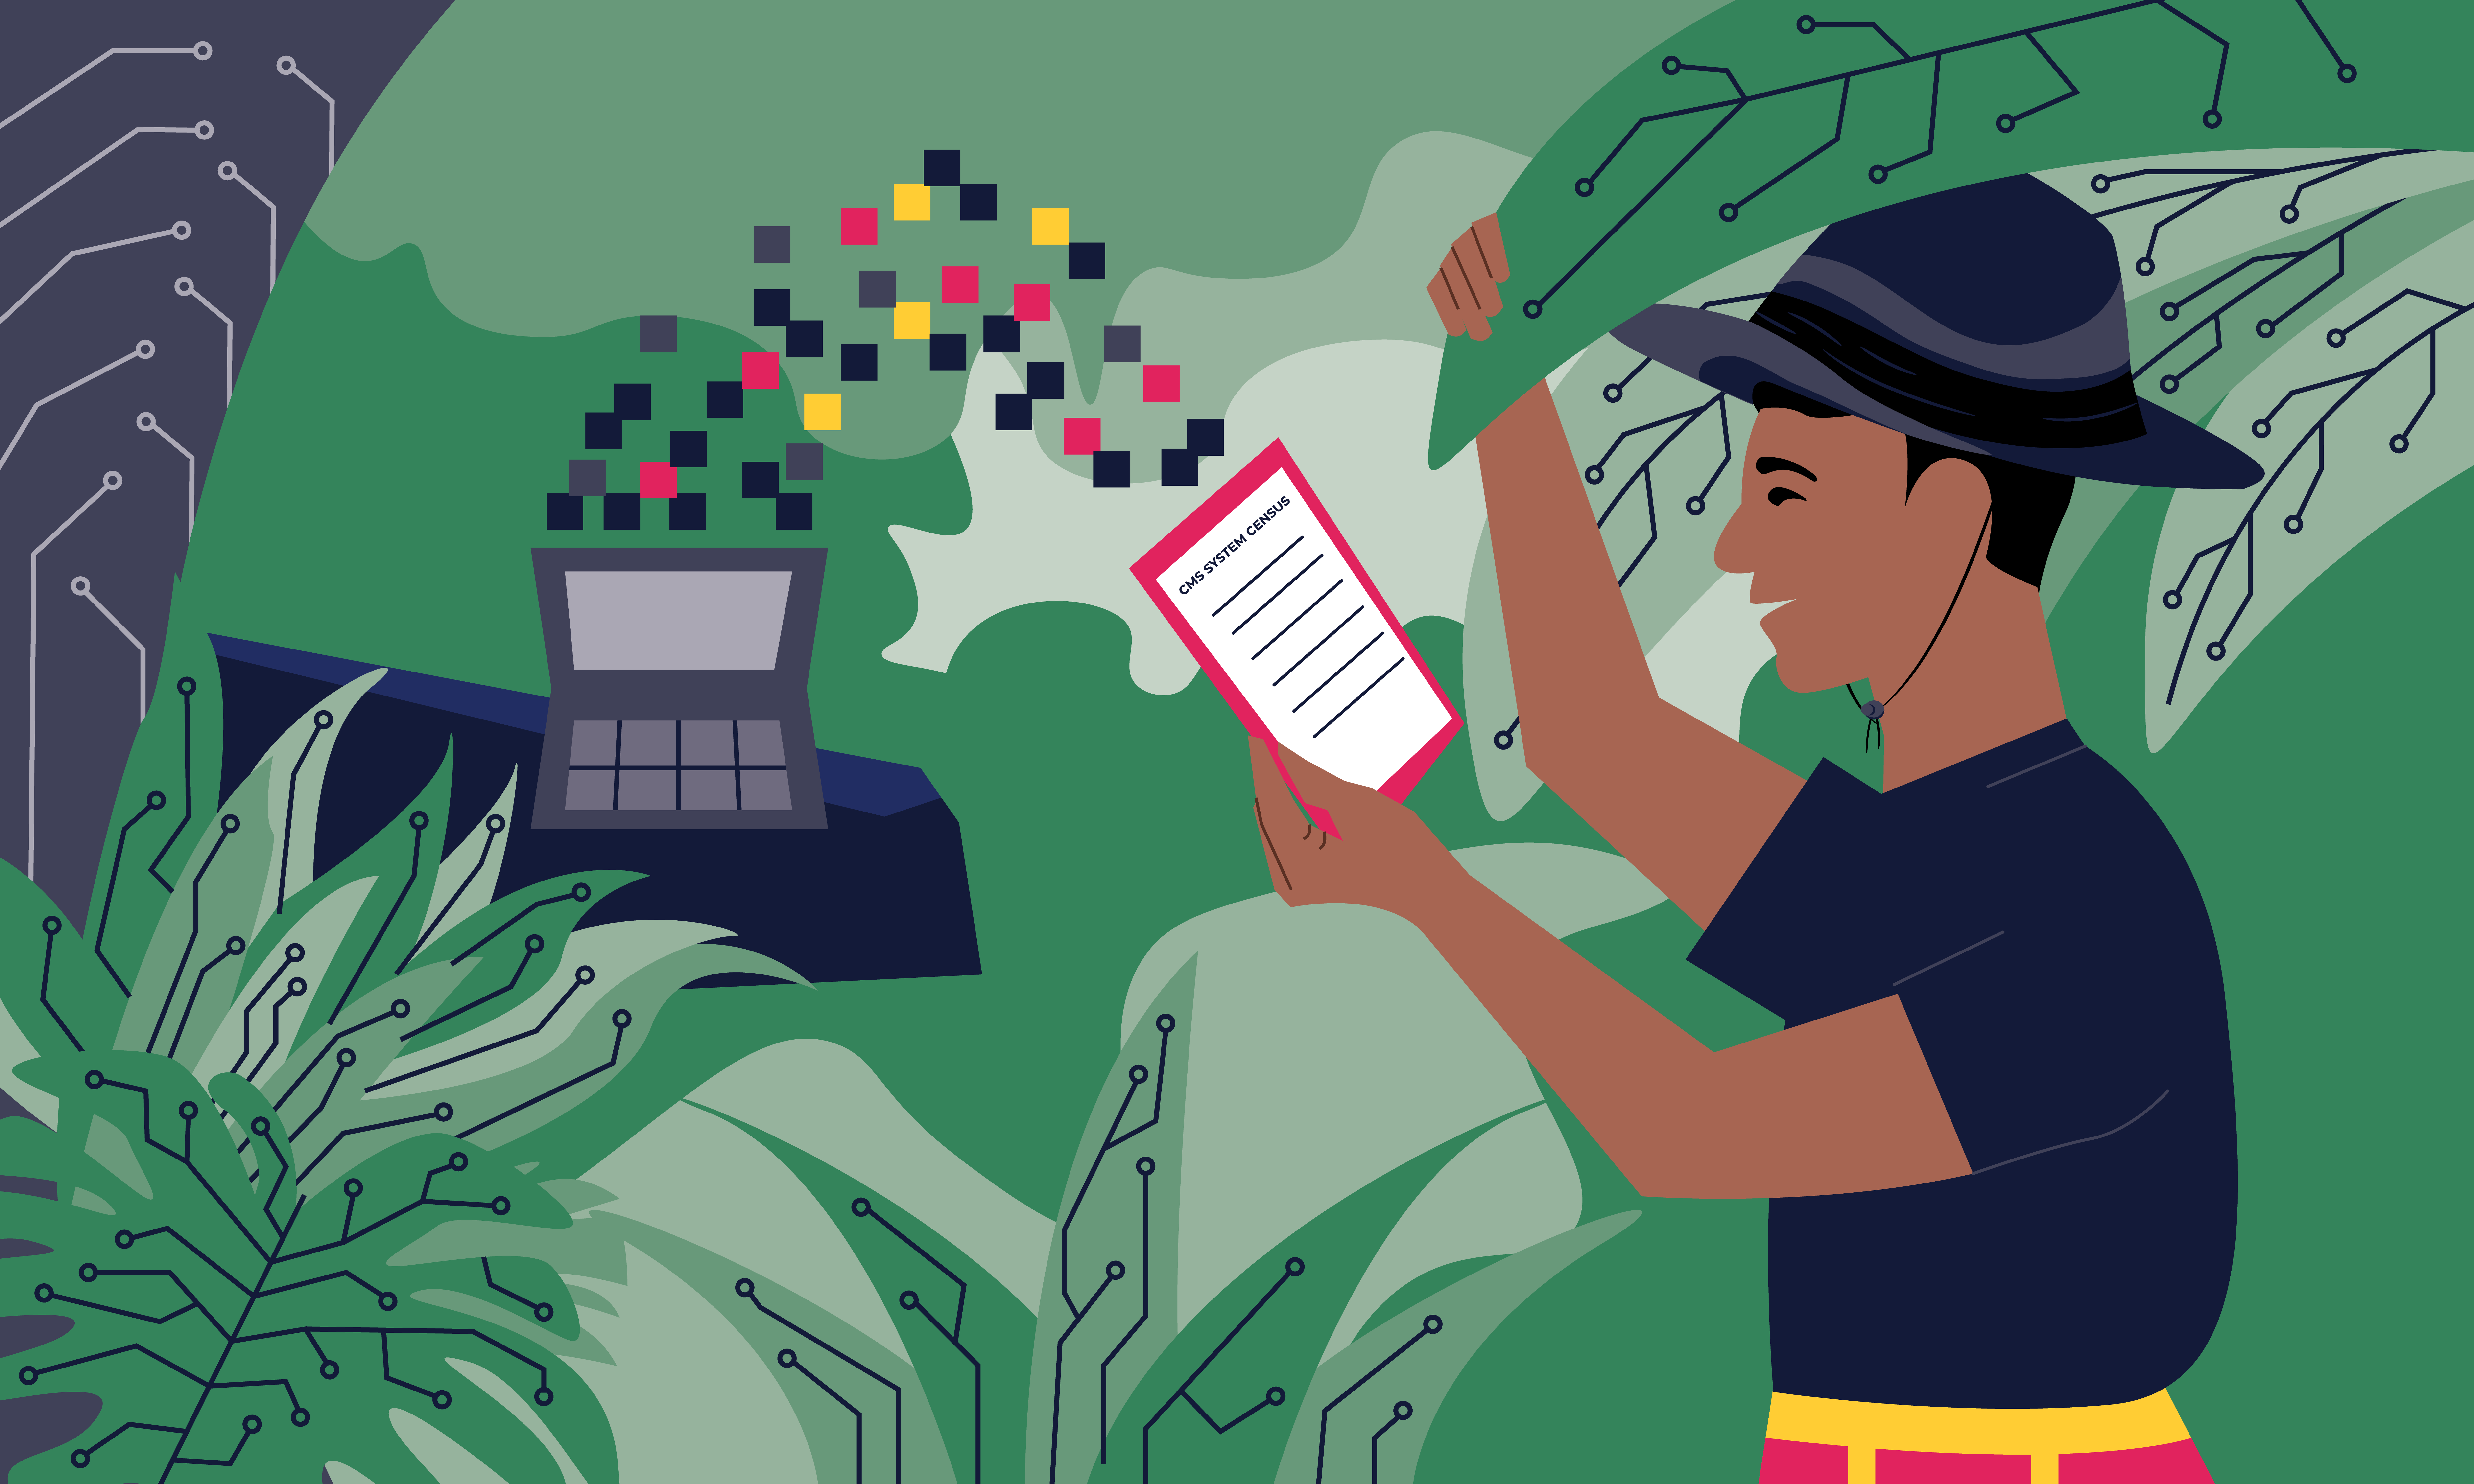 Graphic of a man in a pith hat holding a document titled "CMS System Census" that is feeding data to a laptop in the middle of a jungle.